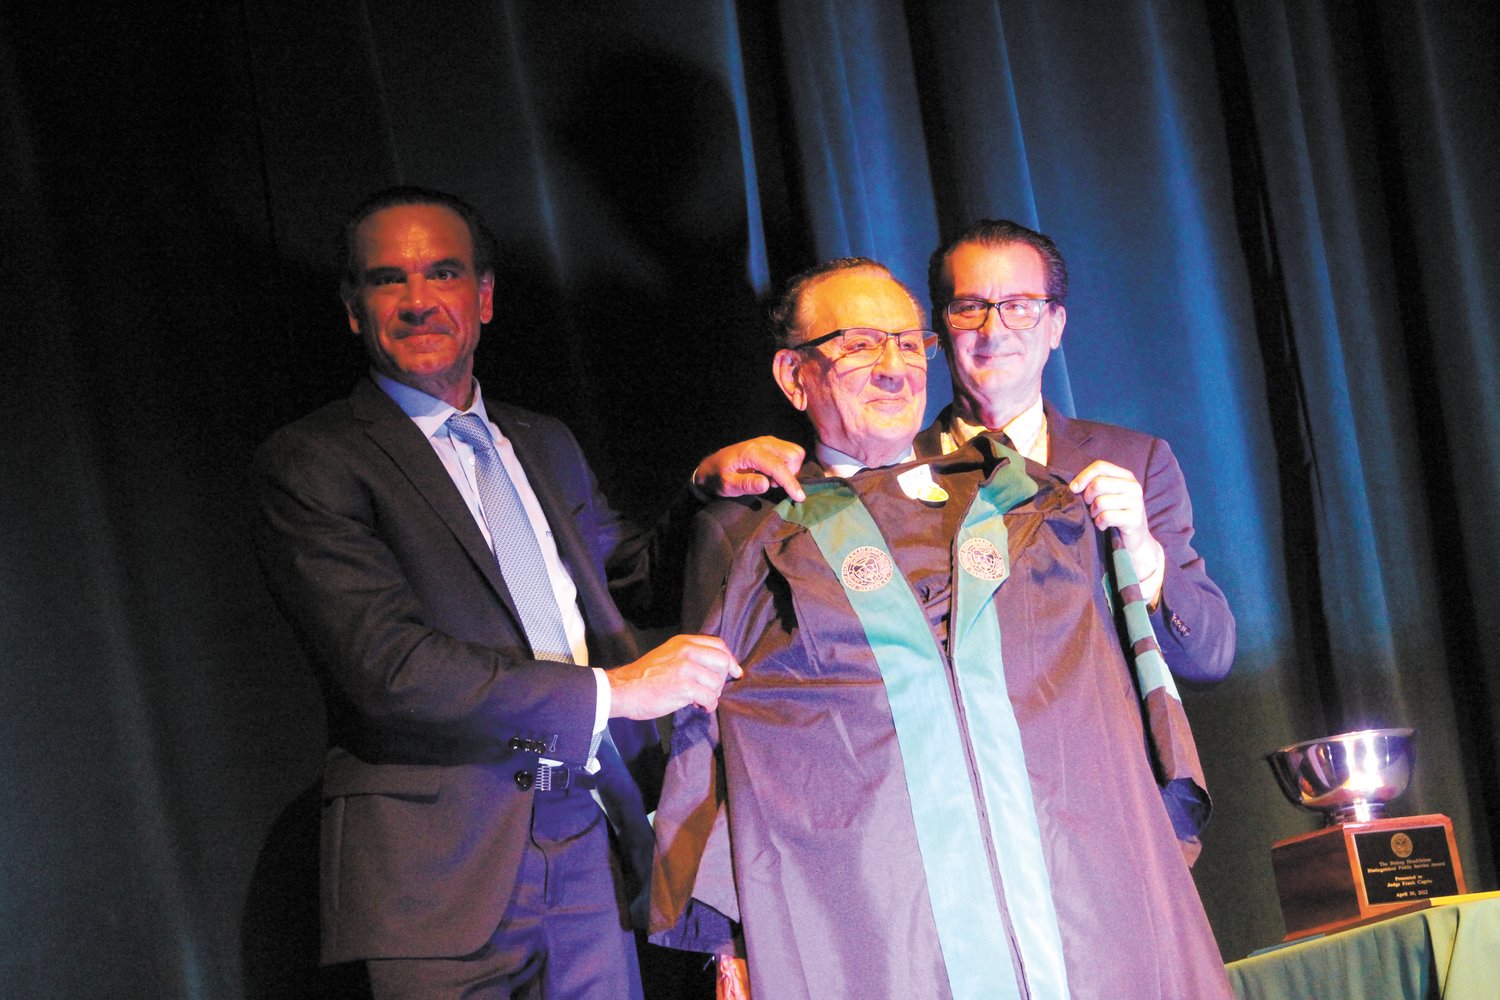 CAUGHT IN WARWICK: Judge Frank Caprio, whose court televised show “Caught in Providence” has earned him national attention for his compassion and bench dialogue with offenders, was presented a graduation robe (Fr. Robert Marciano, Hendricken president, suggested he wear it for the show) after being made an honorary Hendricken graduate.  Helping Judge Caprio with the robe are his sons Frank and David, both Hendricken graduates.